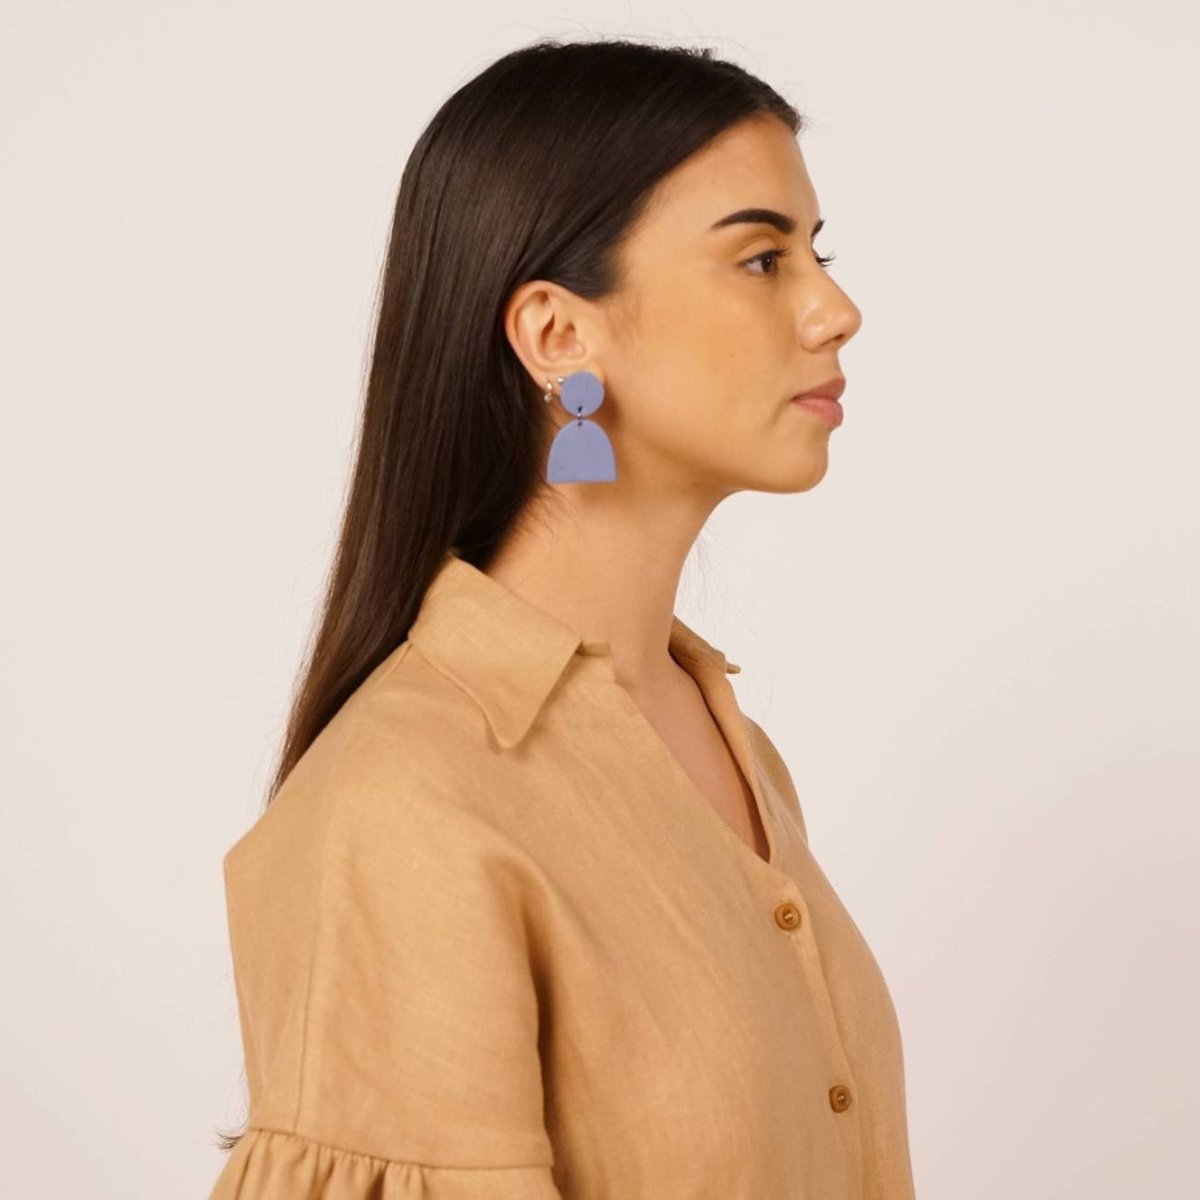 Aries earrings in the shade sky. Flat circle top piece joined by a a separate half-moon shaped bottom piece. Displayed on a model with dark brown hair. Made in Los Angeles, California by Hey Moon Designs.